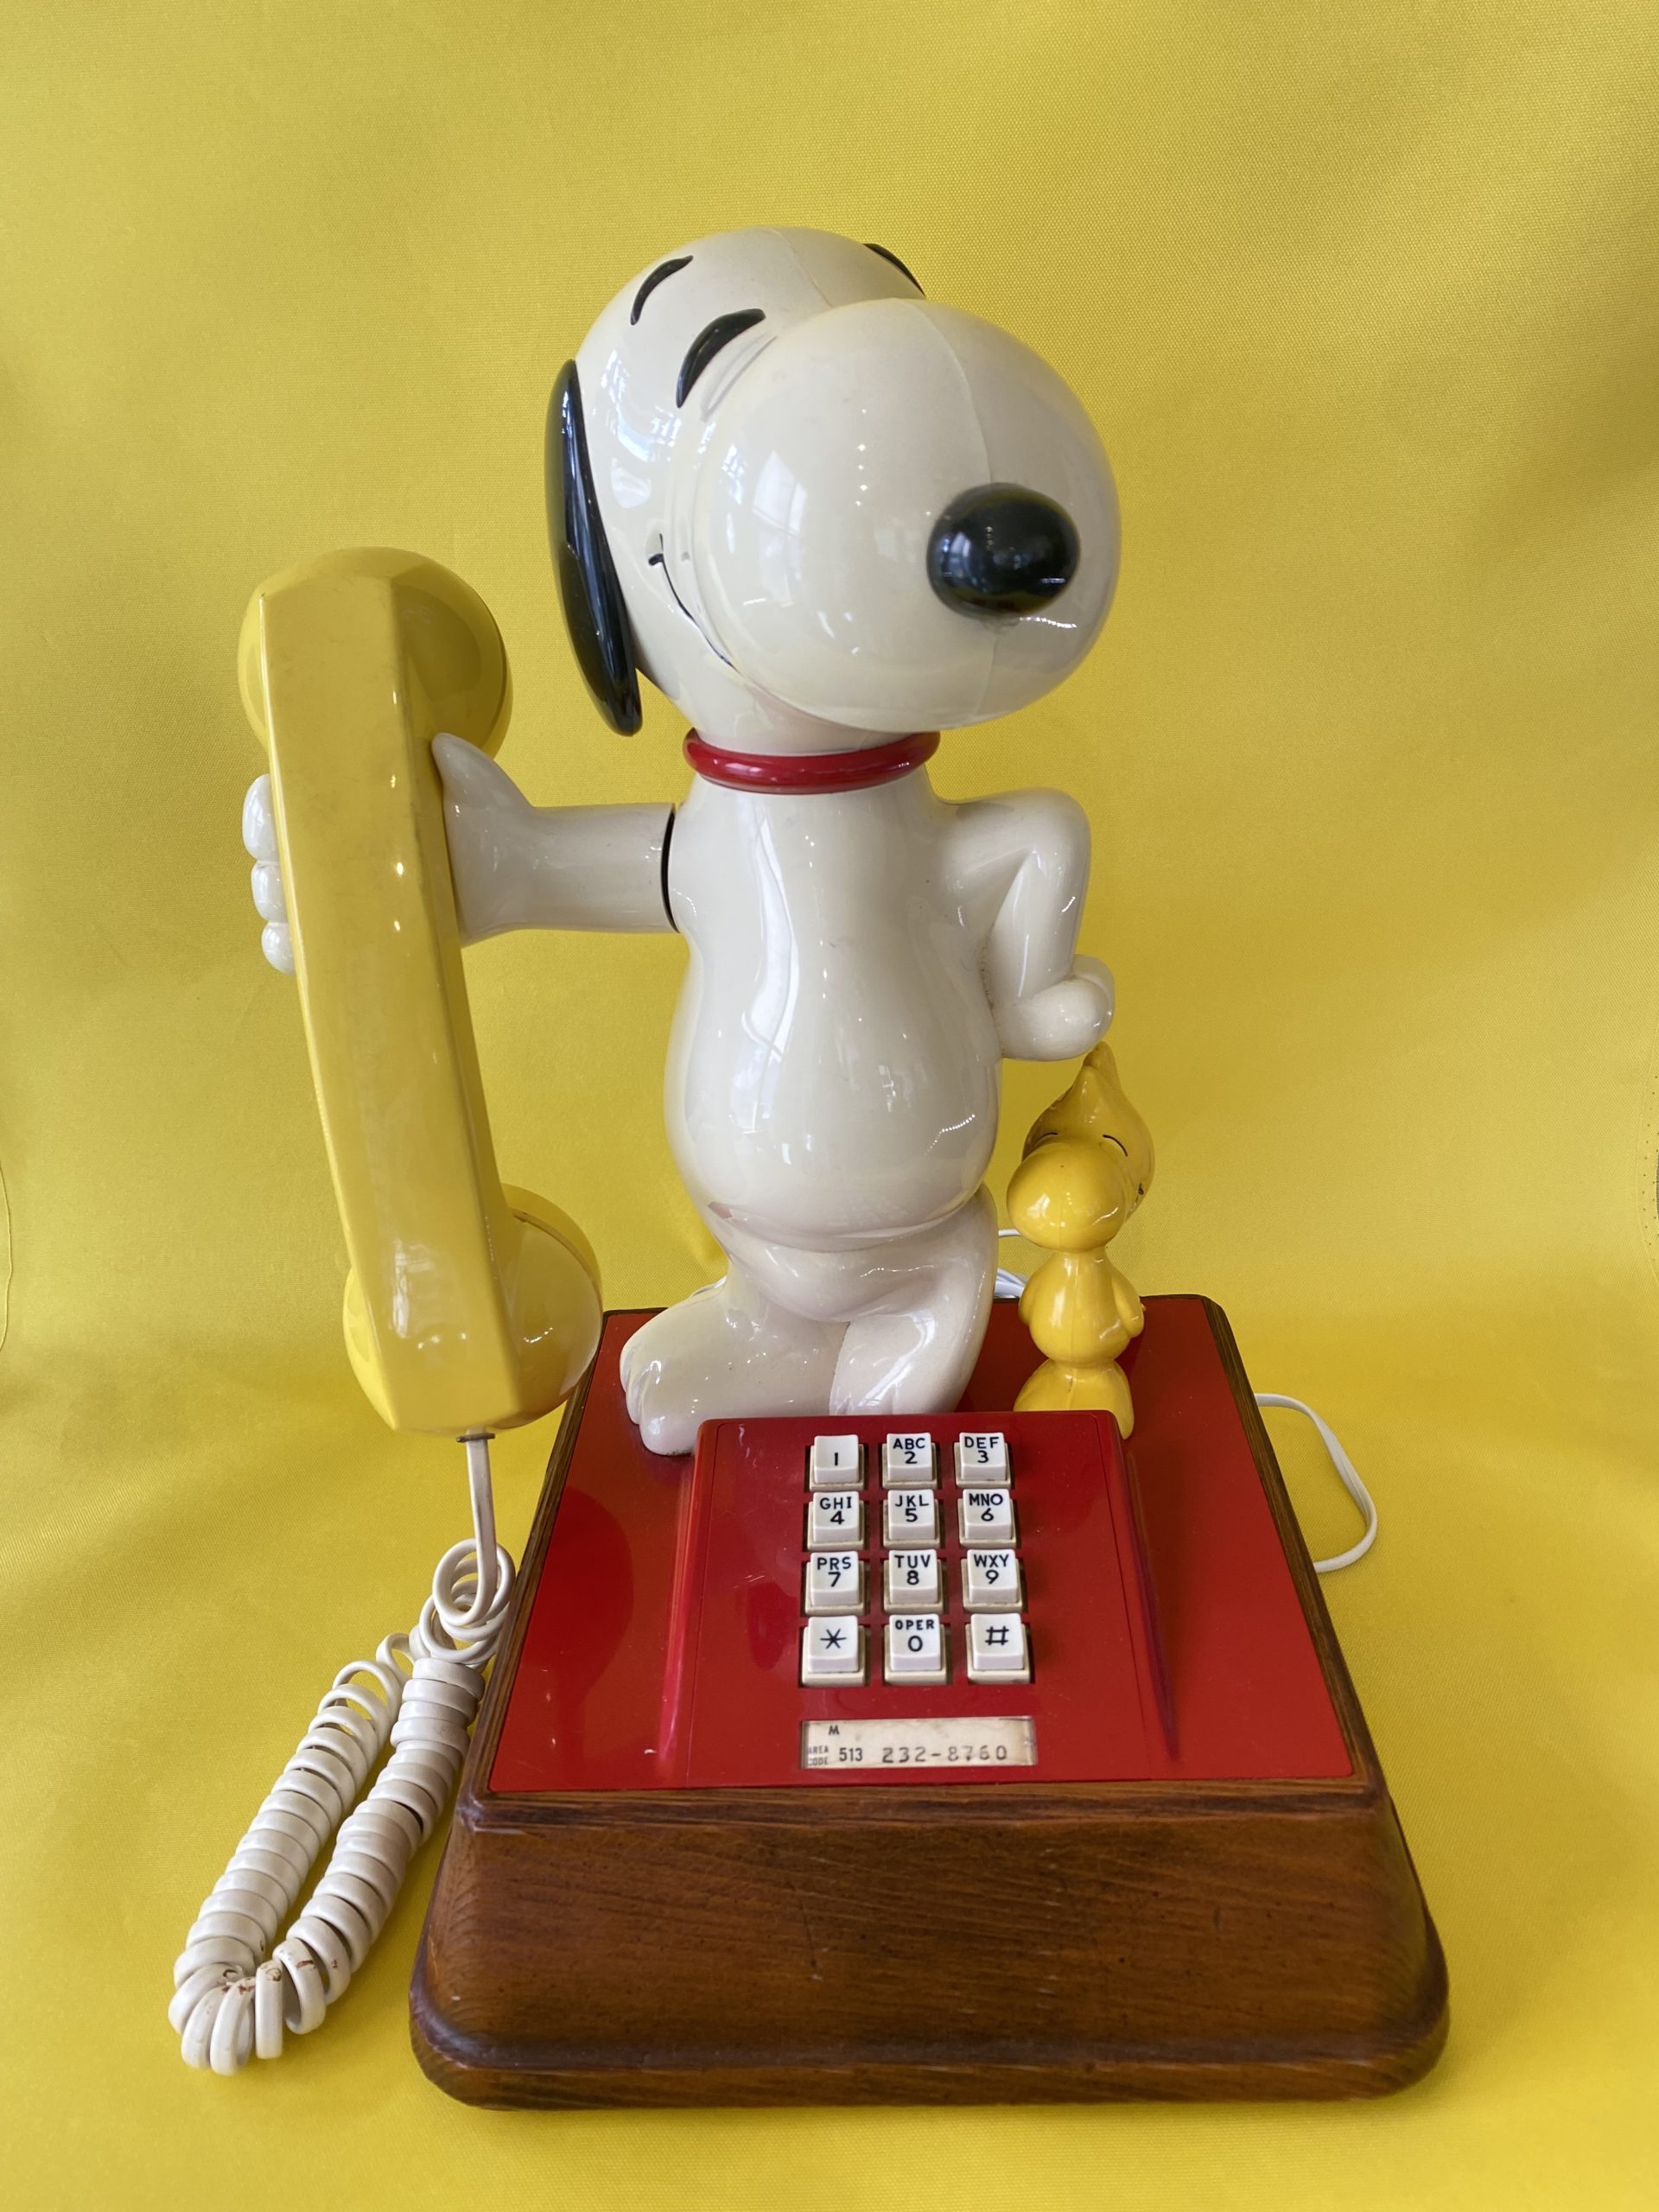 SNOOPY　レトロ電話器